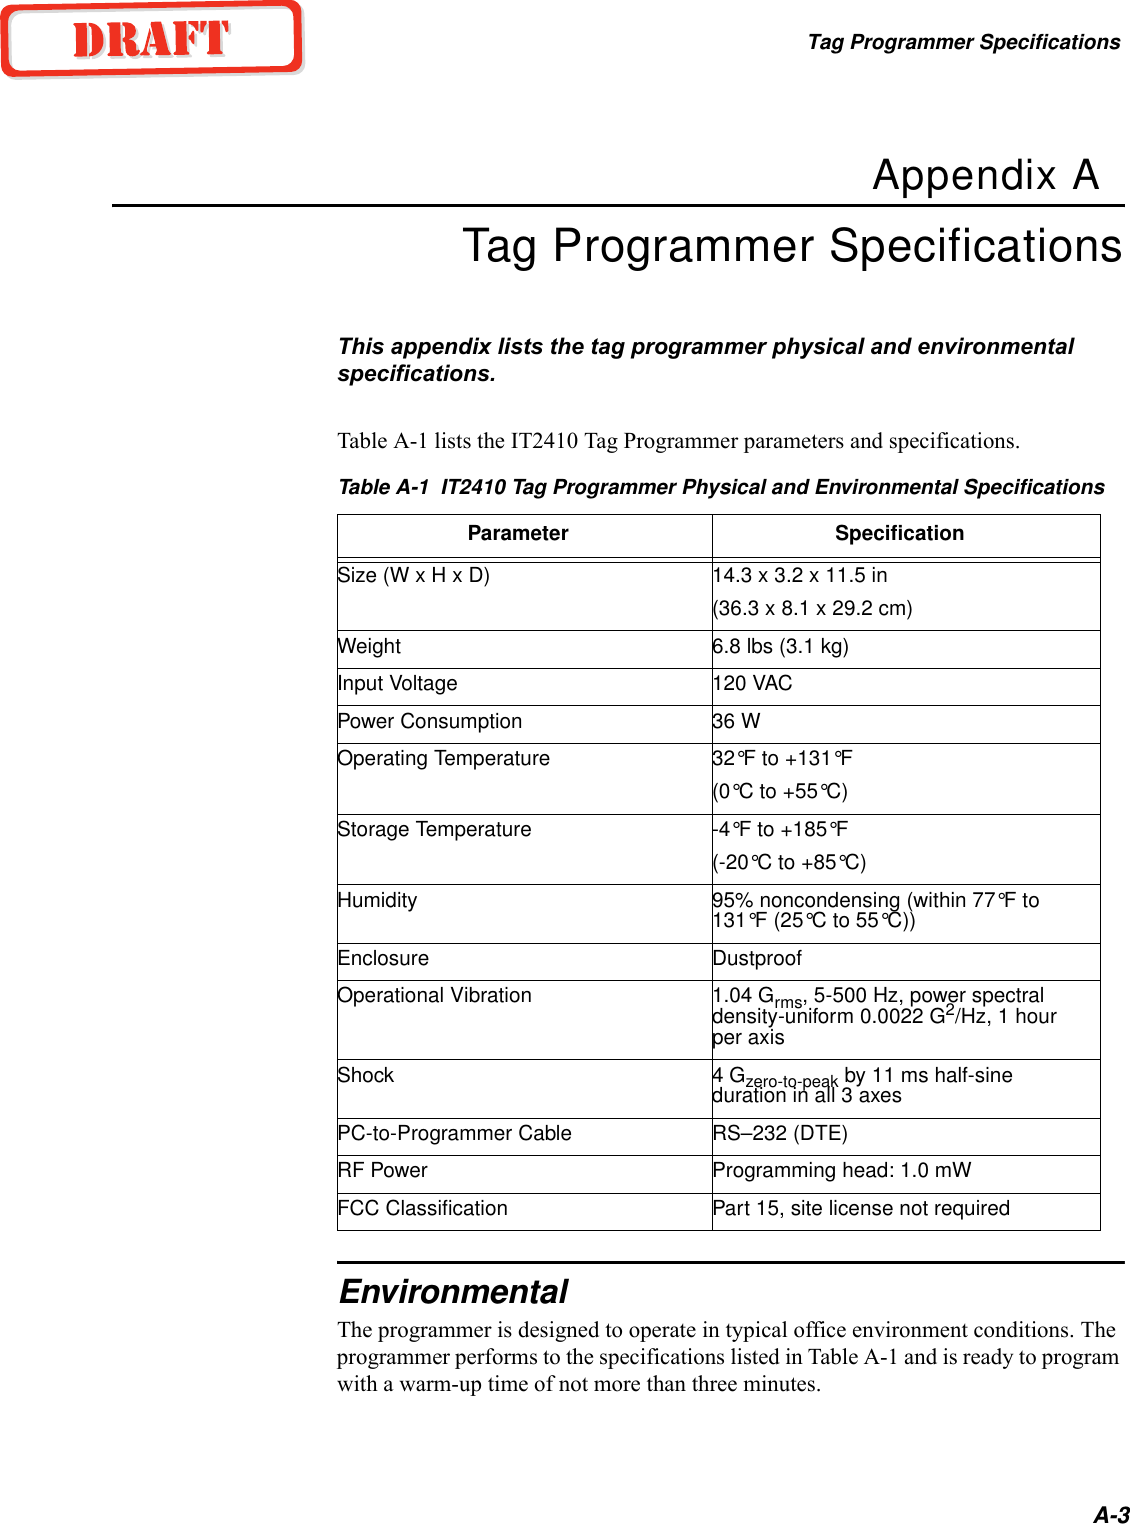 Tag Programmer SpecificationsA-3Appendix ATag Programmer SpecificationsThis appendix lists the tag programmer physical and environmental specifications.Table A-1 lists the IT2410 Tag Programmer parameters and specifications.EnvironmentalThe programmer is designed to operate in typical office environment conditions. The programmer performs to the specifications listed in Table A-1 and is ready to program with a warm-up time of not more than three minutes.Table A-1  IT2410 Tag Programmer Physical and Environmental SpecificationsParameter SpecificationSize (W x H x D) 14.3 x 3.2 x 11.5 in(36.3 x 8.1 x 29.2 cm)Weight 6.8 lbs (3.1 kg)Input Voltage 120 VACPower Consumption 36 WOperating Temperature 32°F to +131°F(0°C to +55°C)Storage Temperature -4°F to +185°F(-20°C to +85°C)Humidity 95% noncondensing (within 77°F to 131°F (25°C to 55°C))Enclosure DustproofOperational Vibration 1.04 Grms, 5-500 Hz, power spectral density-uniform 0.0022 G2/Hz, 1 hour per axisShock 4 Gzero-to-peak by 11 ms half-sine duration in all 3 axesPC-to-Programmer Cable RS–232 (DTE)RF Power Programming head: 1.0 mWFCC Classification Part 15, site license not required